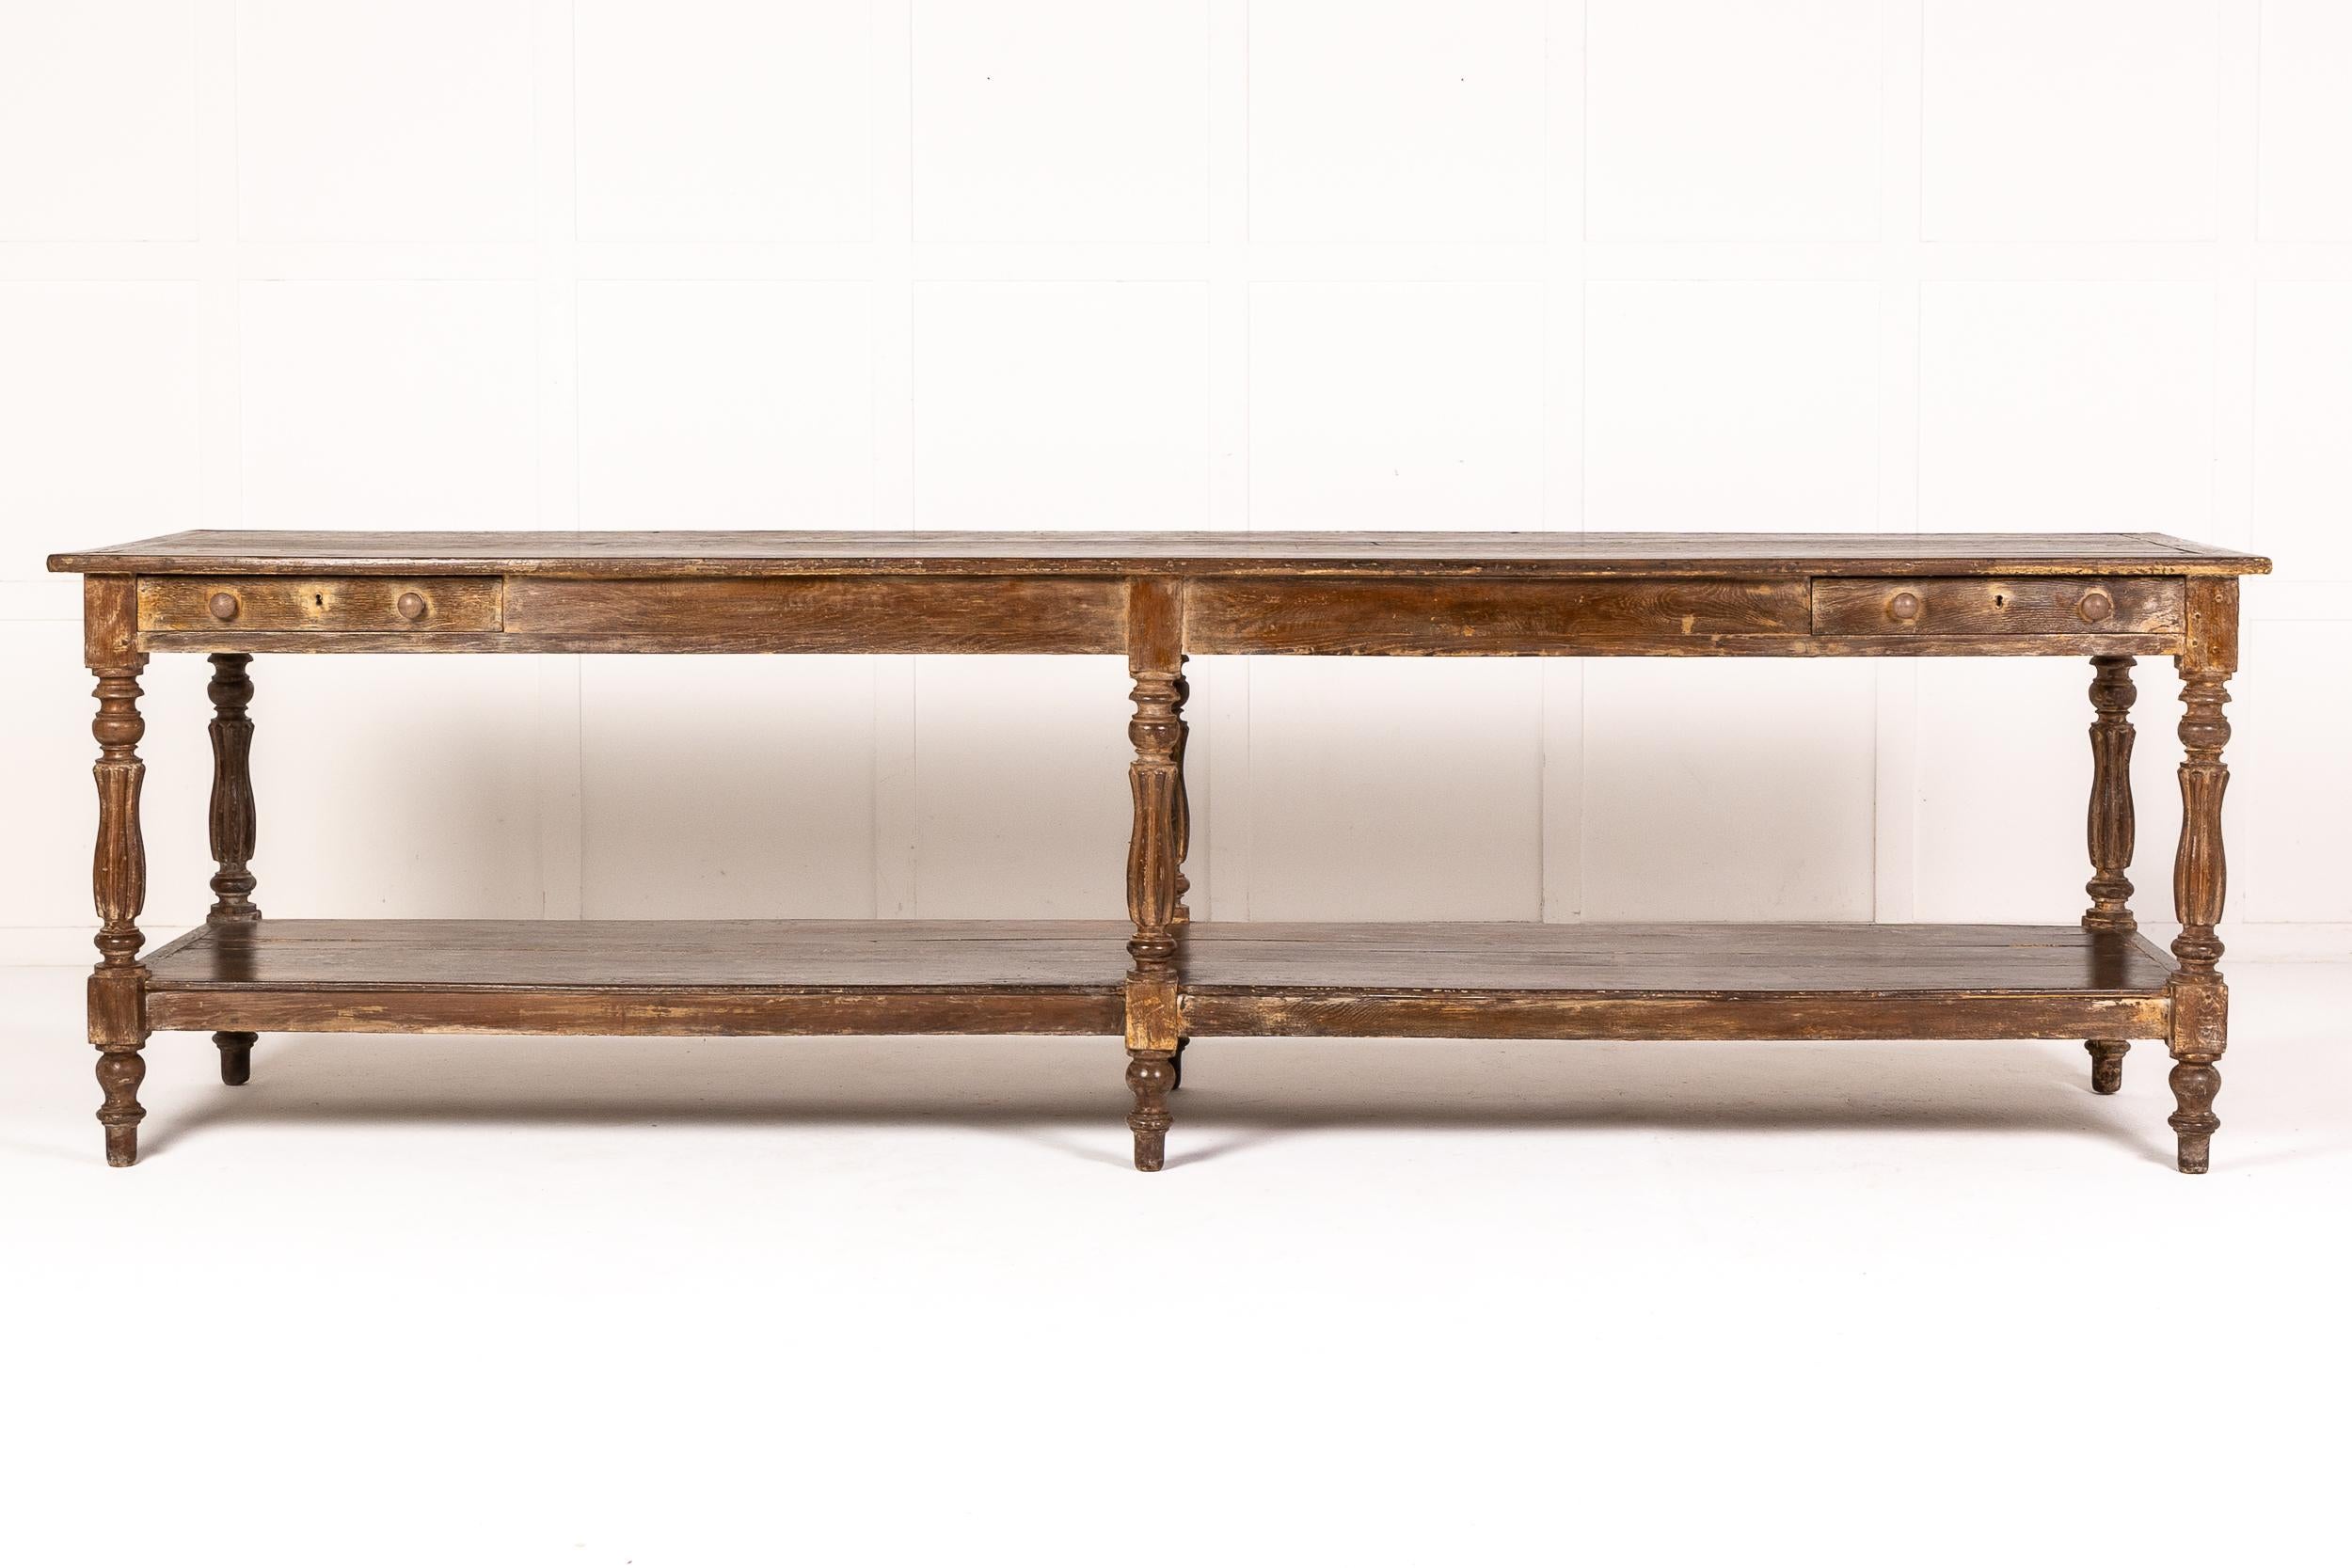 19th century French oak drapers table with very old paint finish. With an edged plank top above a narrow frieze containing two small drawers at each end. The lower shelf is joined by six well turned legs and feet.

Ideal for a serving or hall